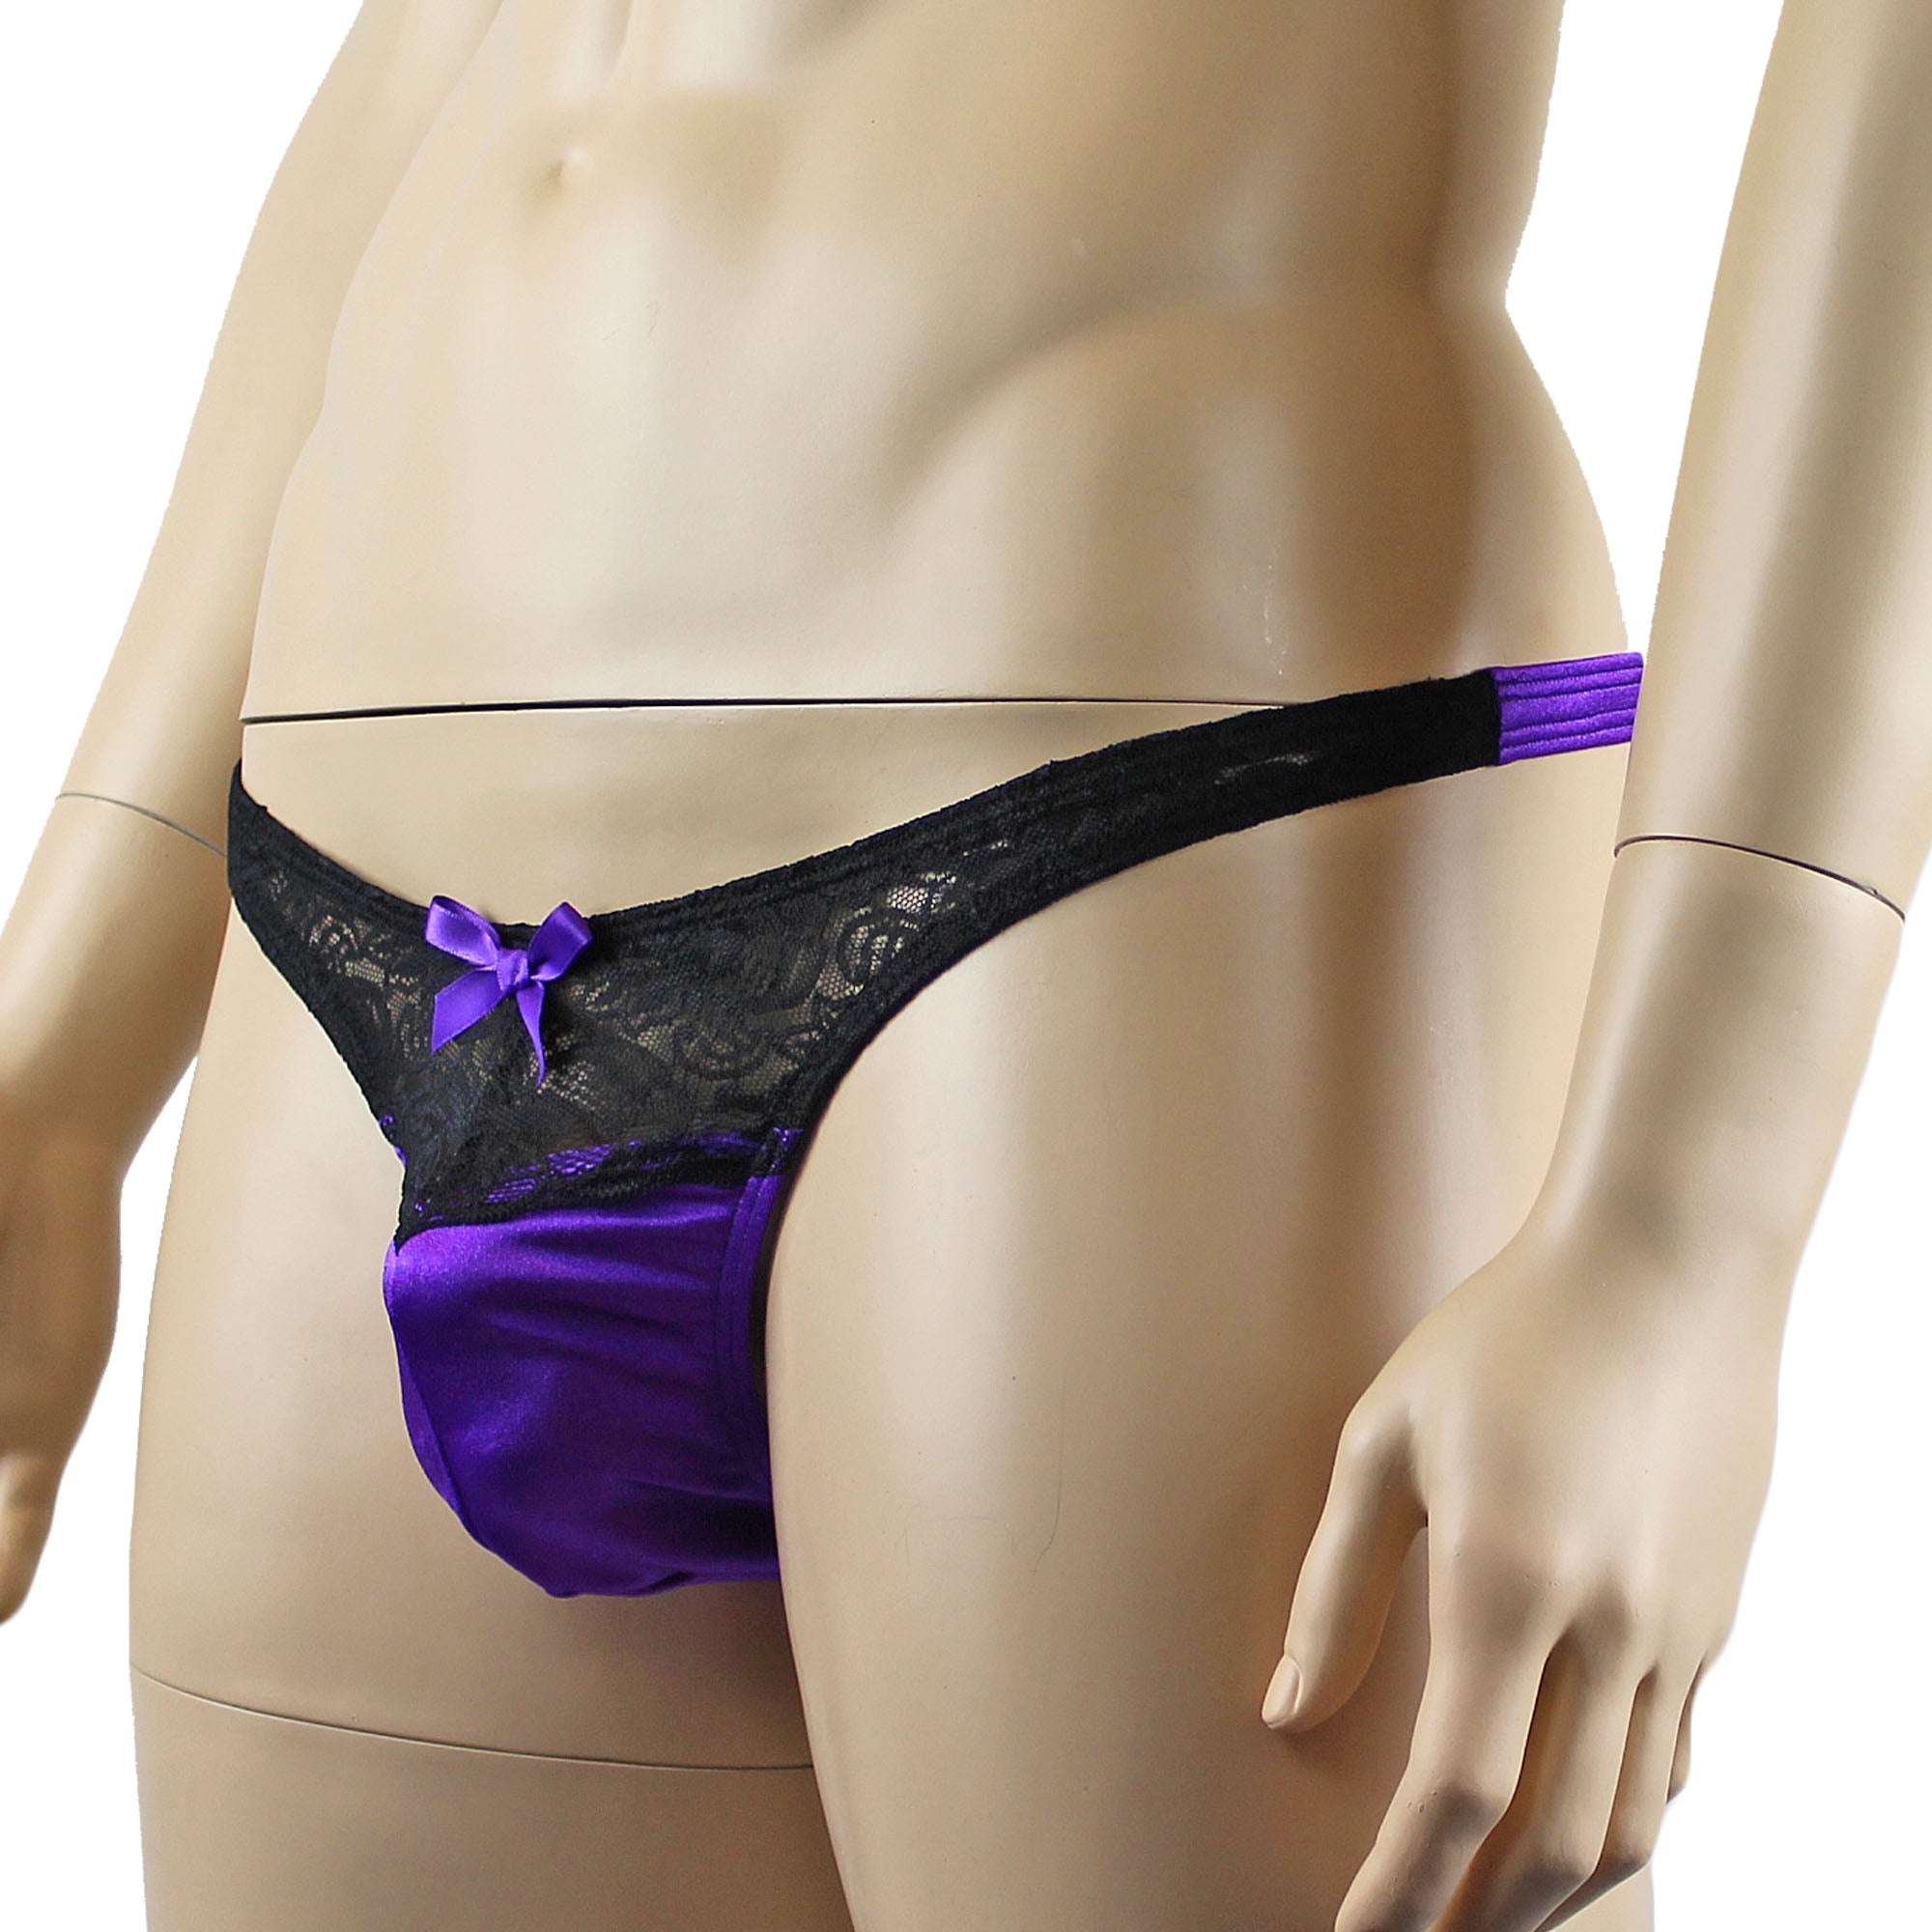 Mens Joanne Underwear Lacey Lovelies Thong Purple and Black Lace